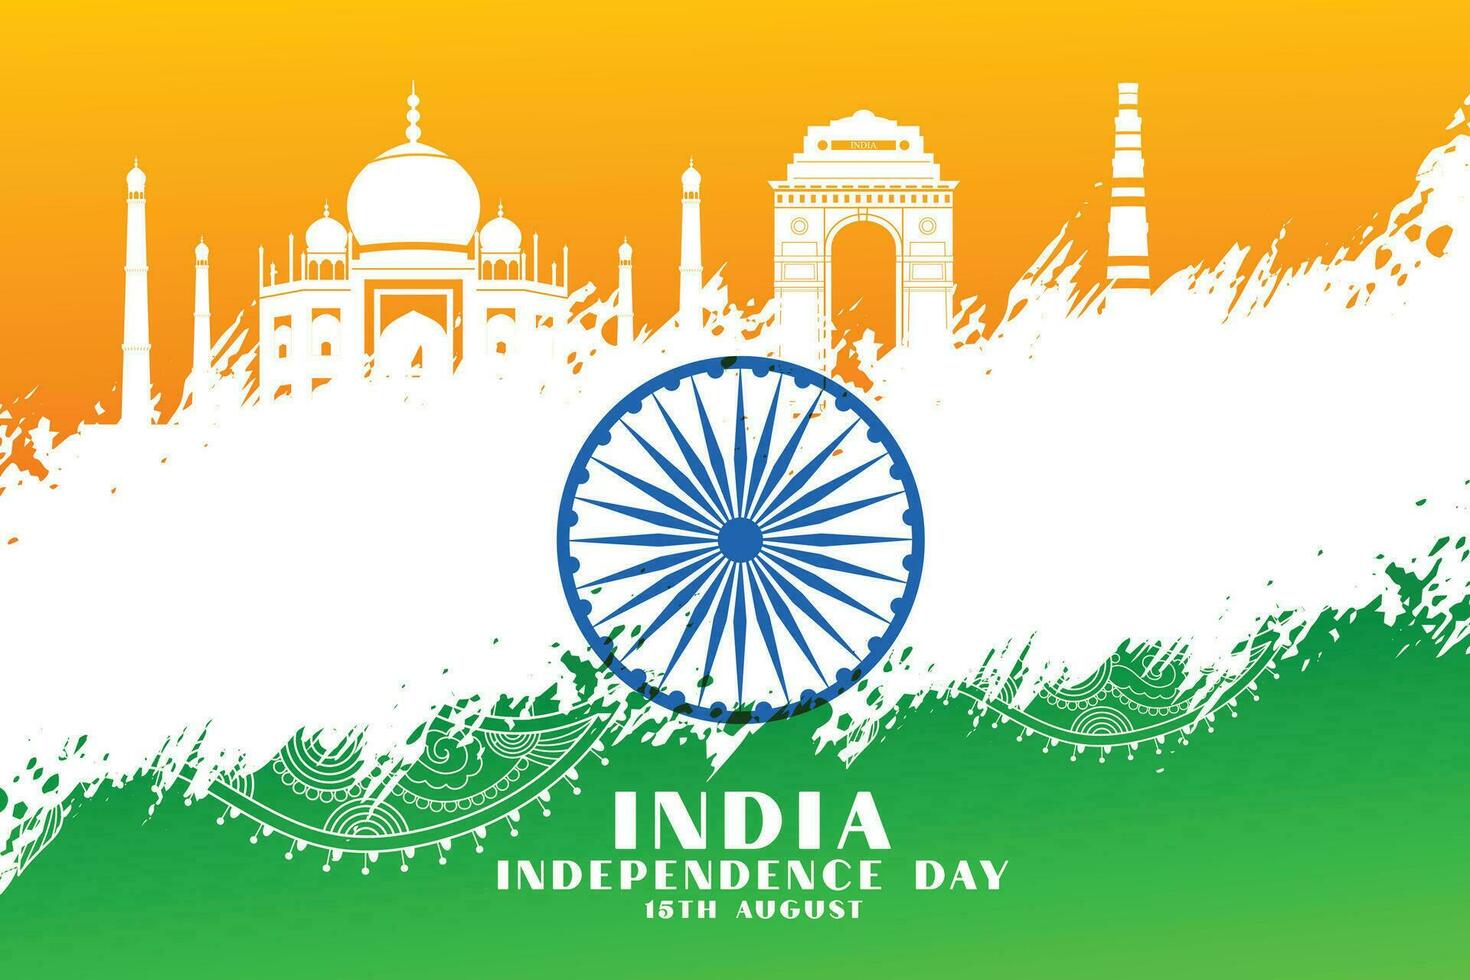 independence day of india illustration background vector